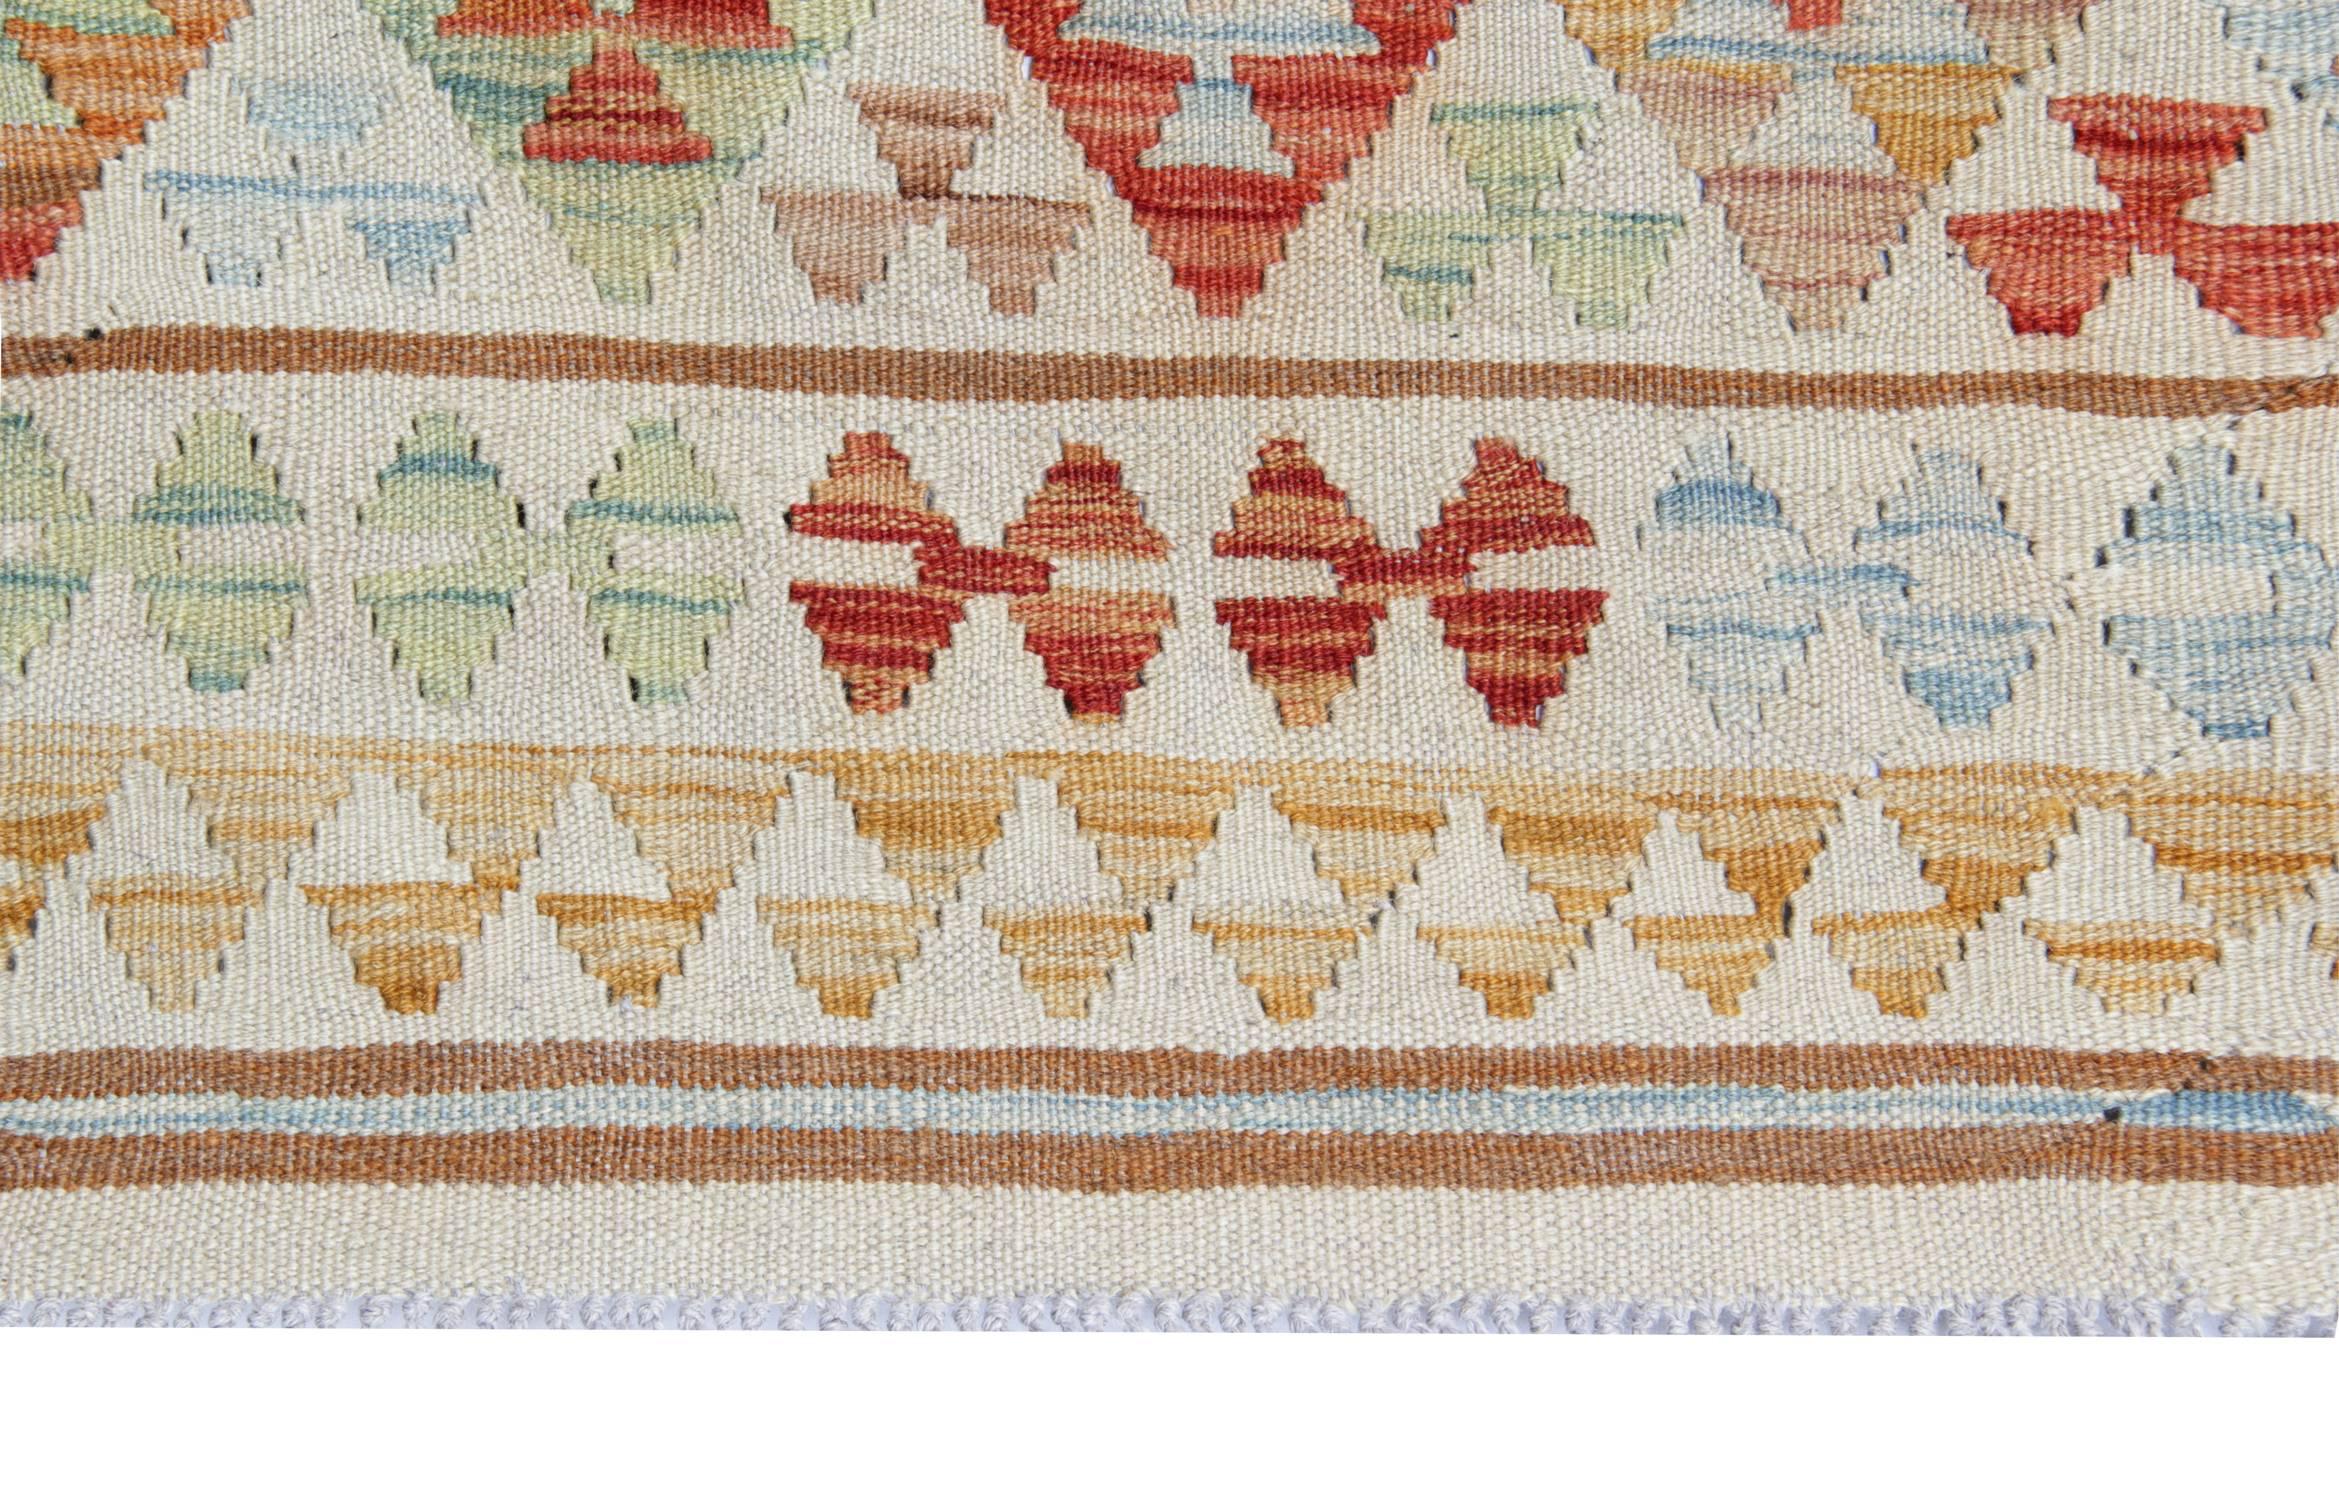 Contemporary Traditional Rugs Design, Afghan Kilim Rugs